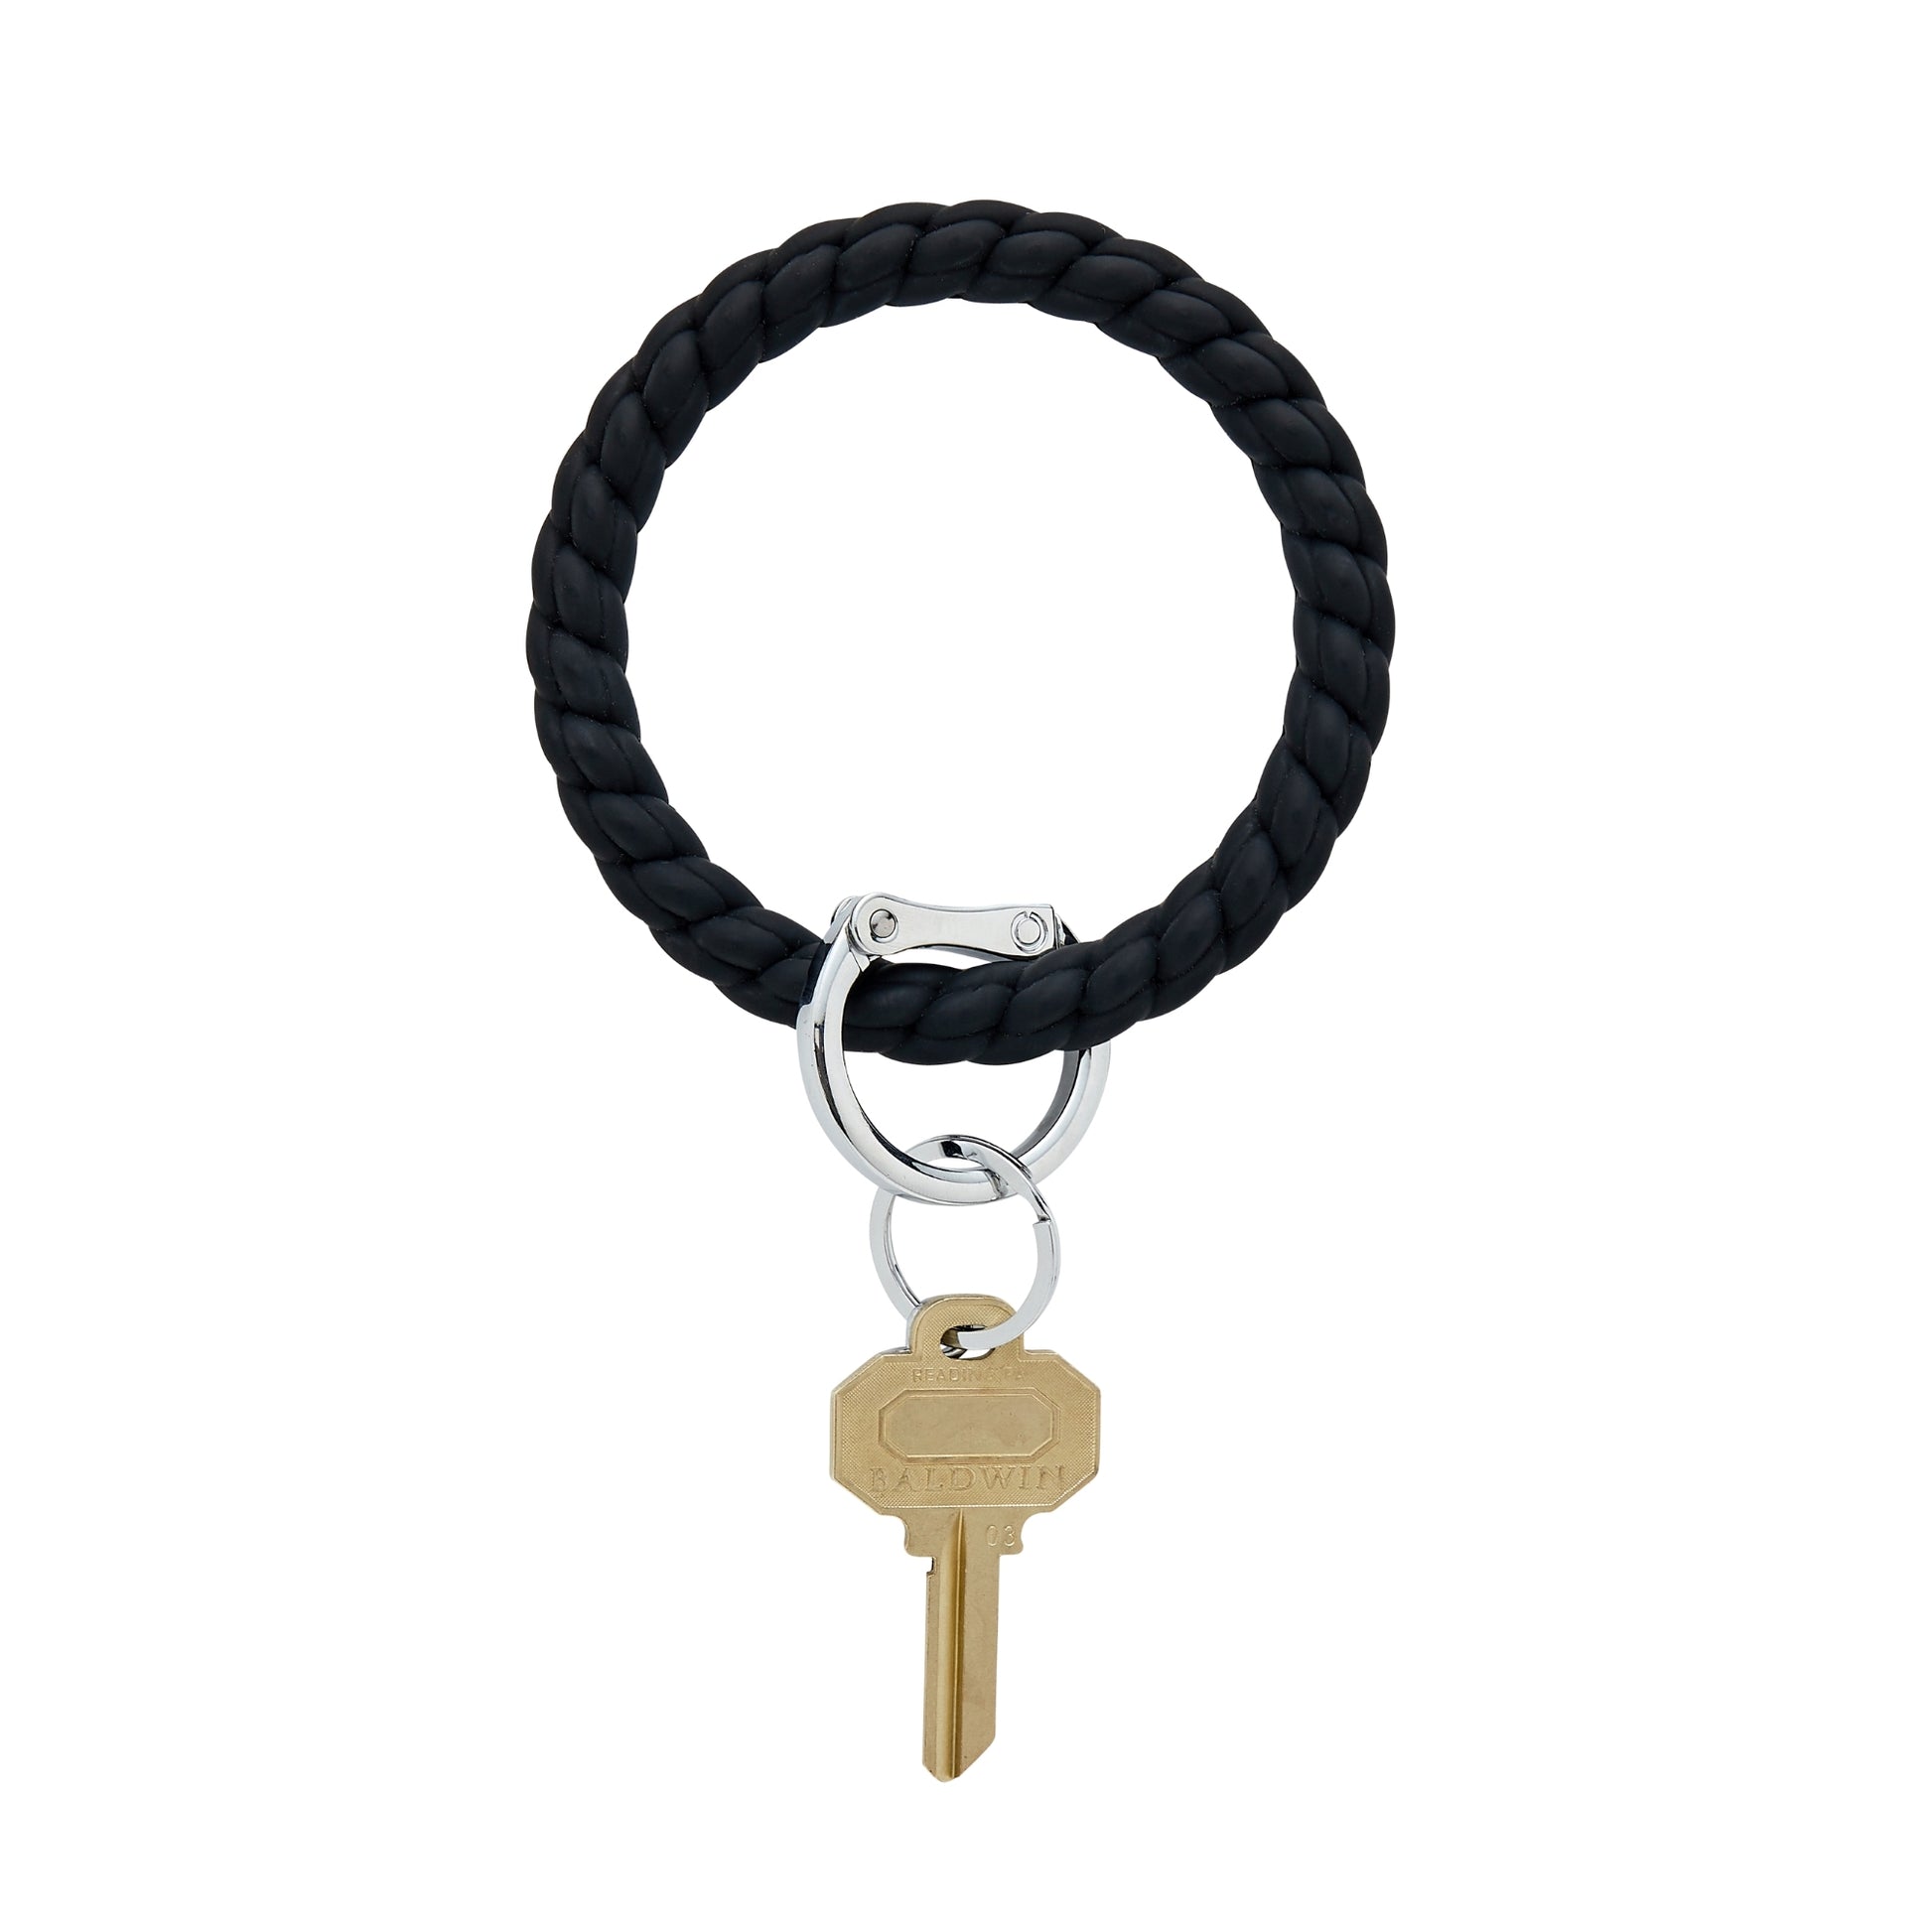 Big O Keyring in Black silicone braided effect.  This handsfree bracelet keychain is shown in black with split ring and key attached.